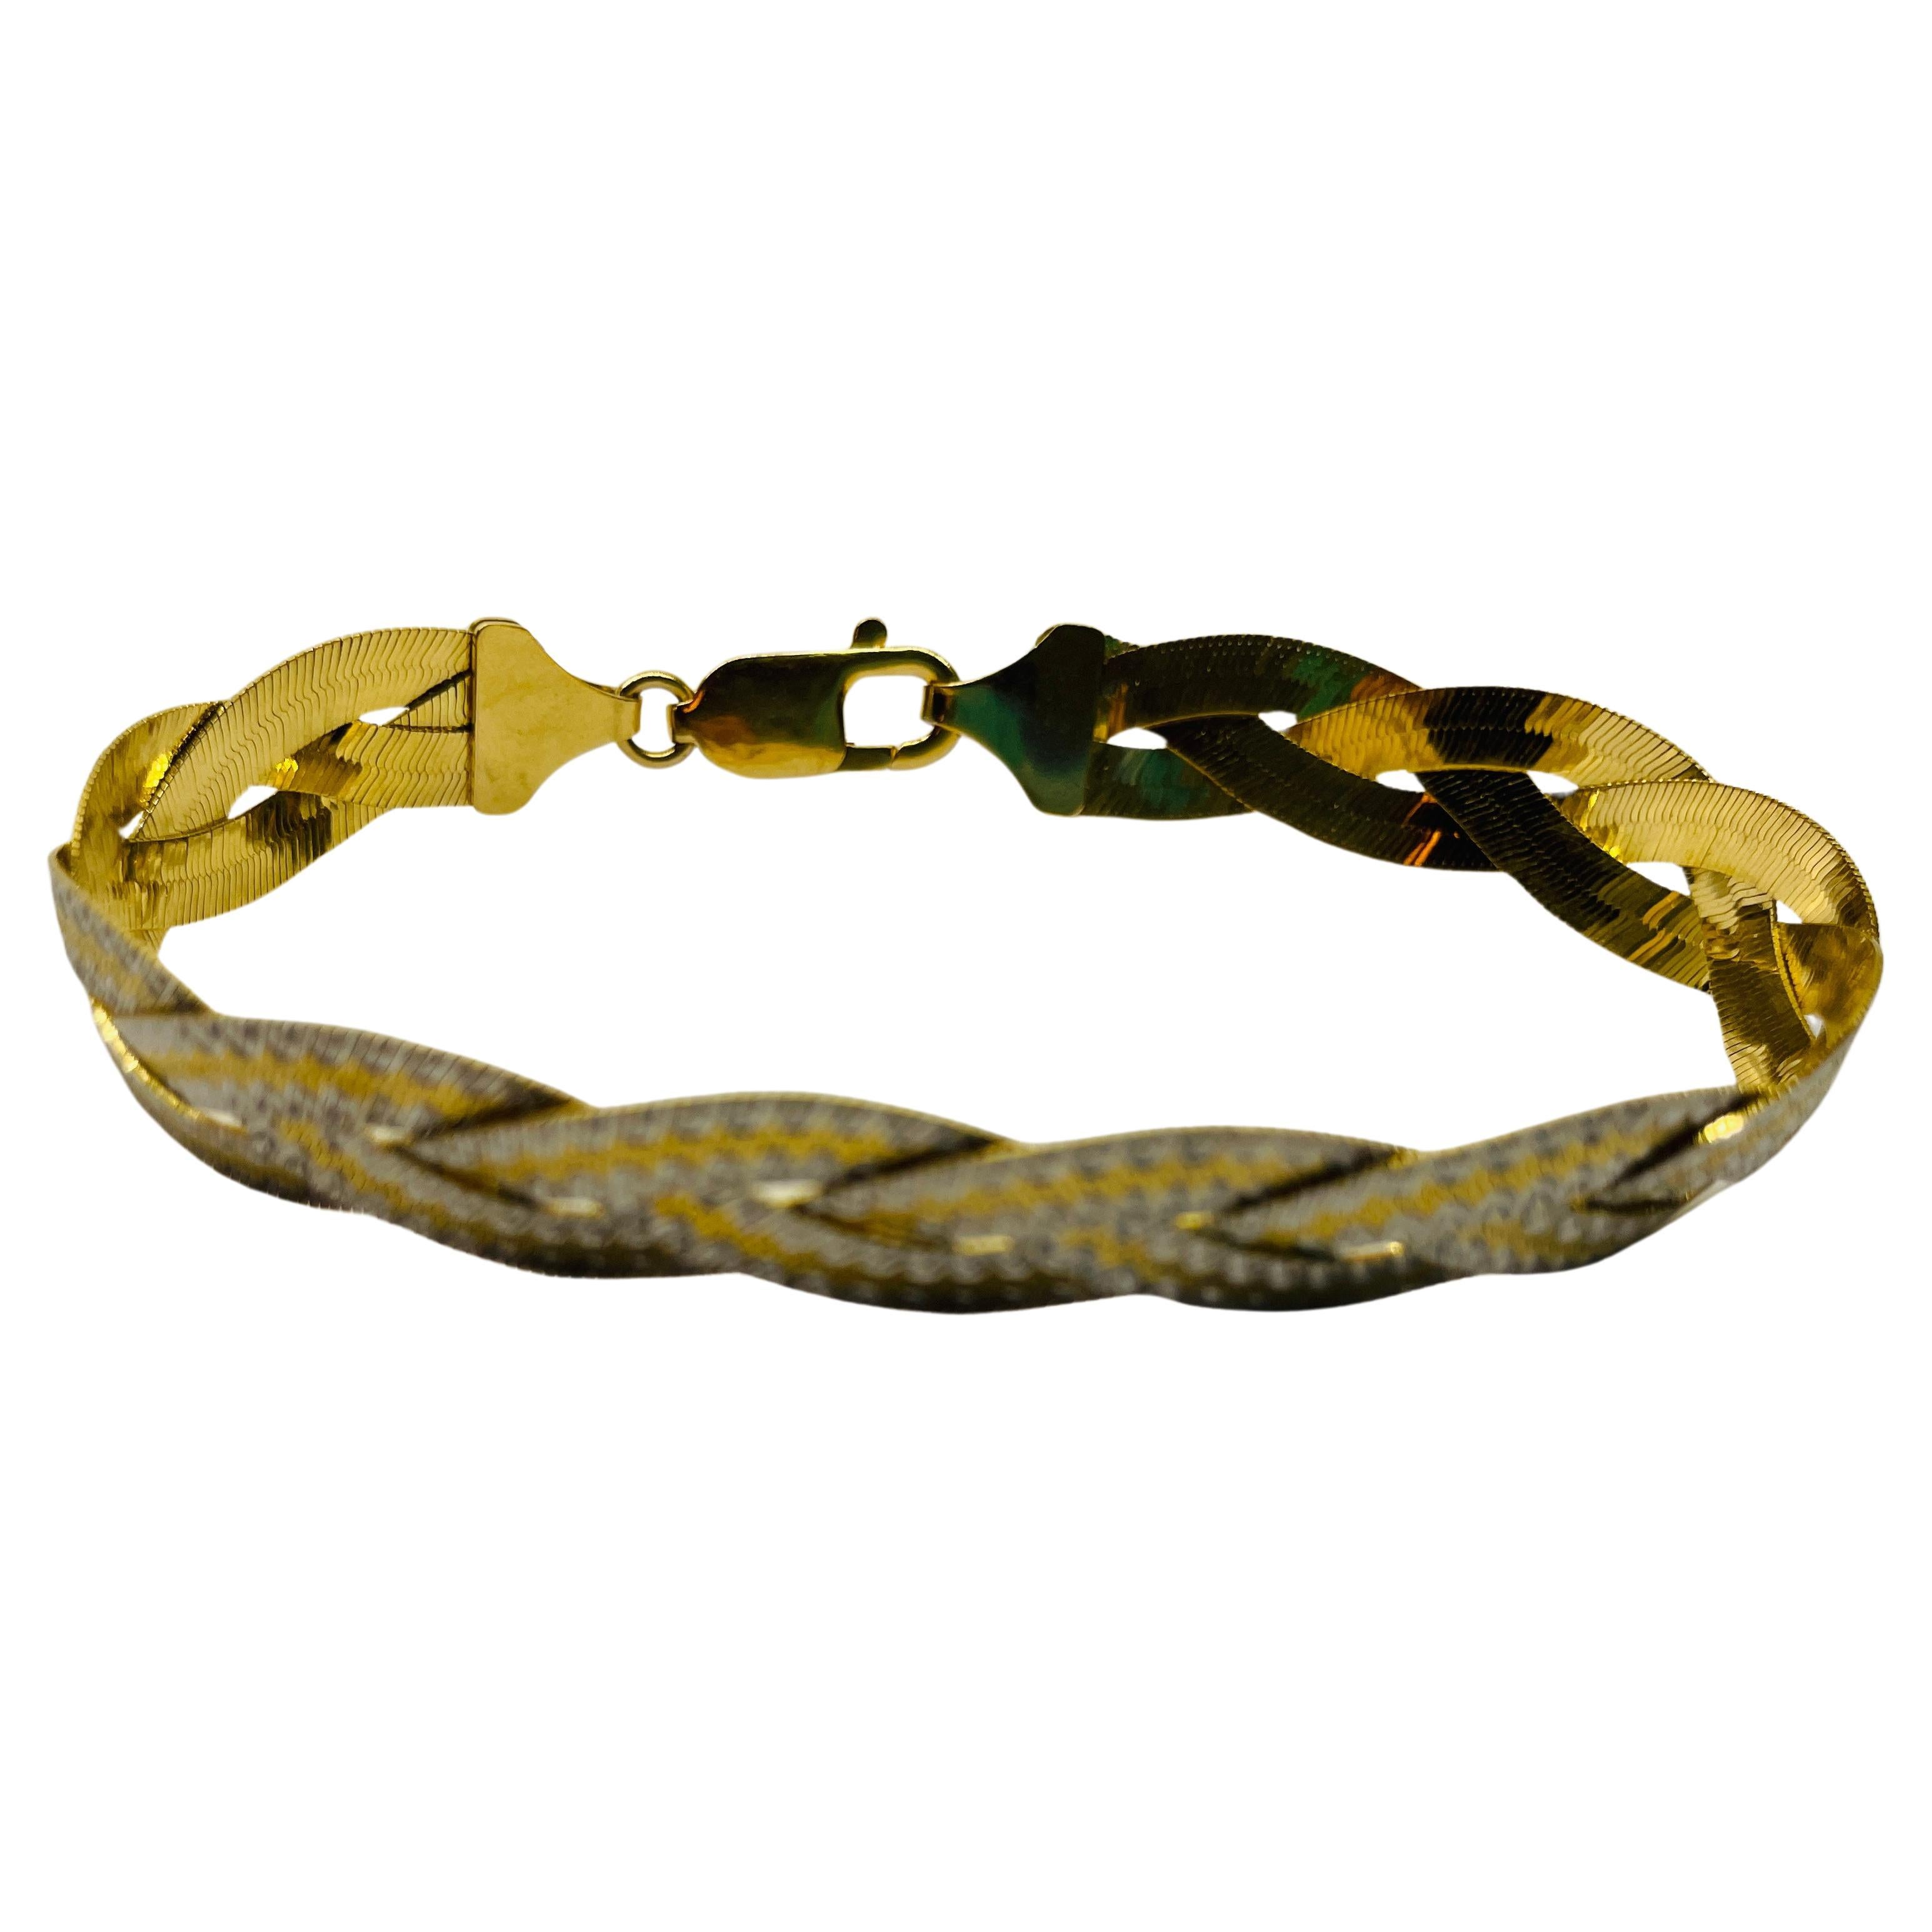 Two-Tone 18k Gold Braided Reversible Bracelet, 
Yellow gold and white gold.  
French Art Deco style one side is two-tone with white and gold stripes alternating across the braided herringbone bracelet - the other side is yellow gold.  
Lobster